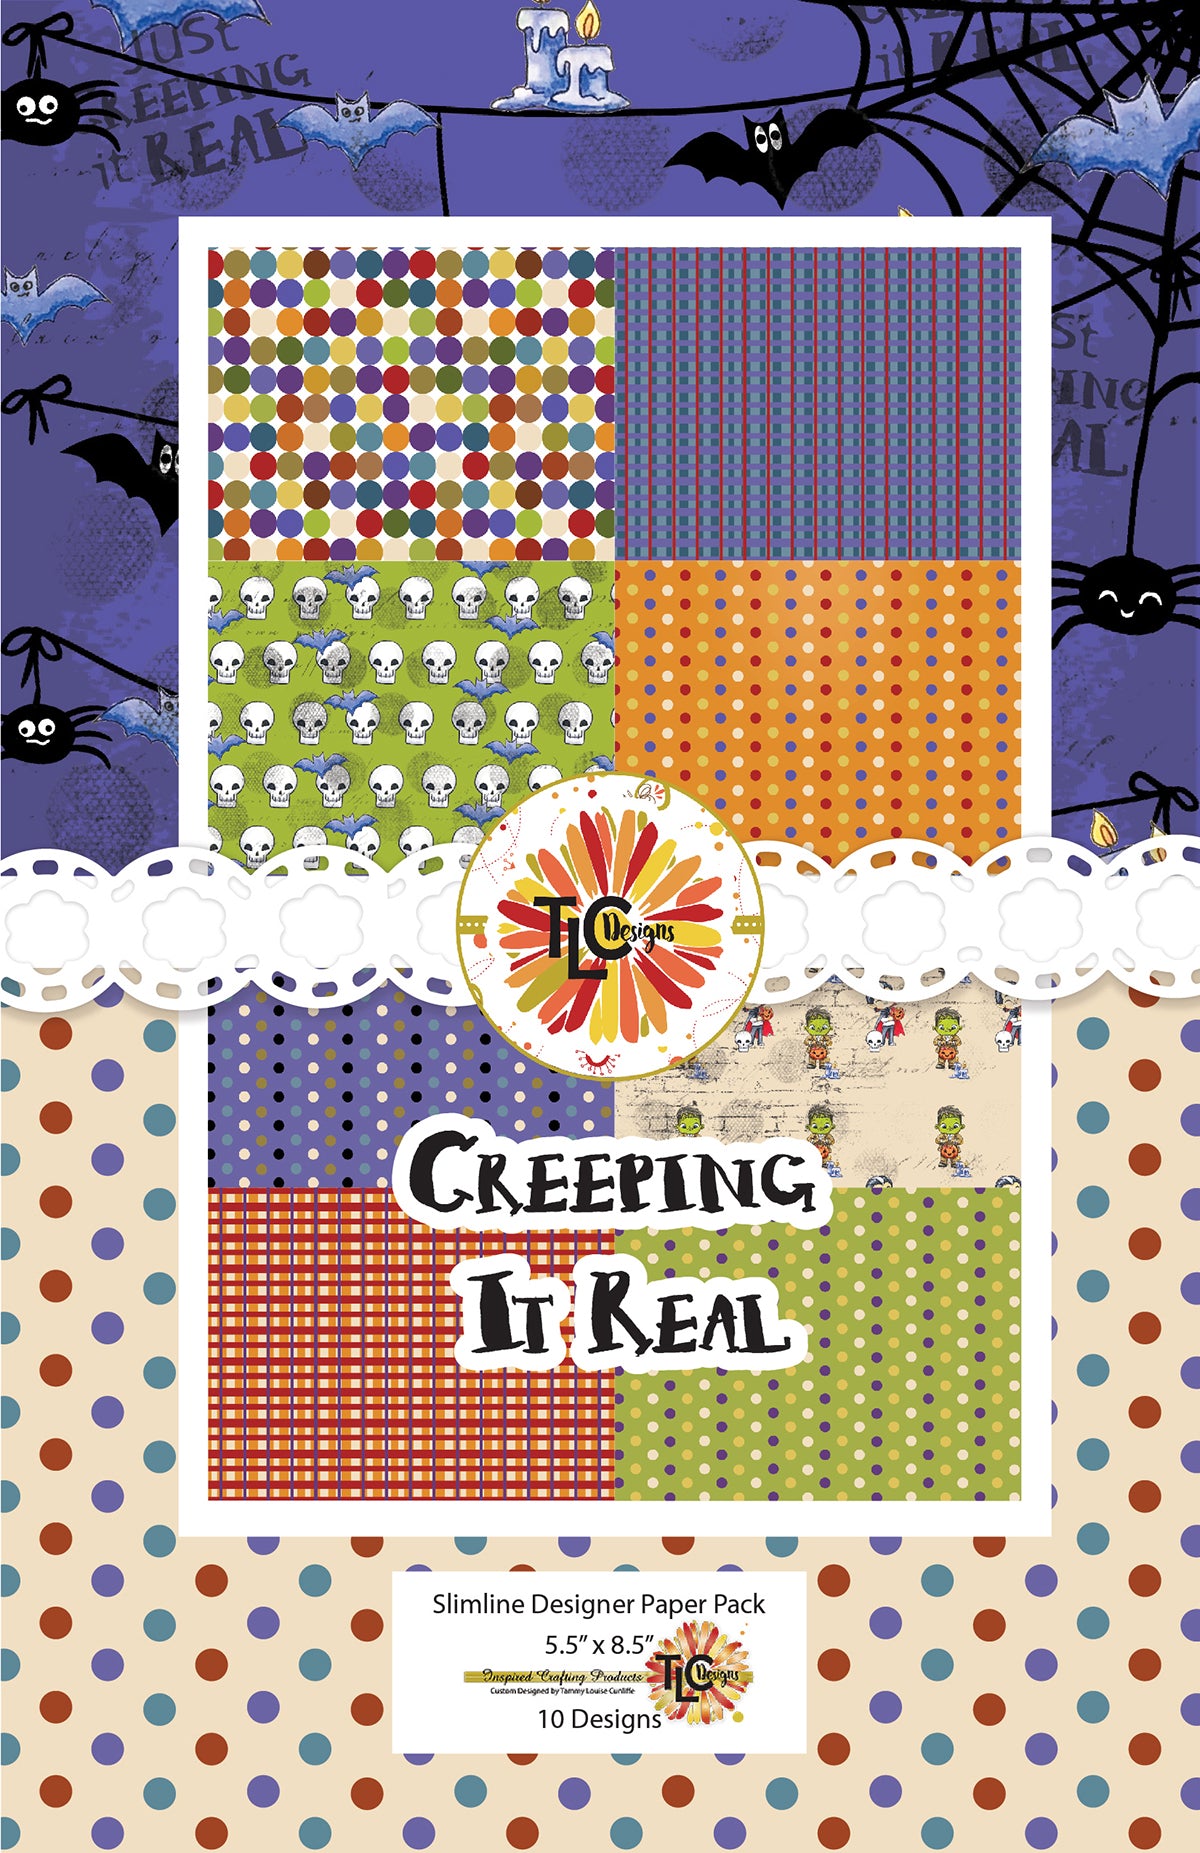 Creeping it Real Digital 10 design custom paper pack coordinating with the Creeping it real digital stamp set exclusively sold at tlcdesigns.shop